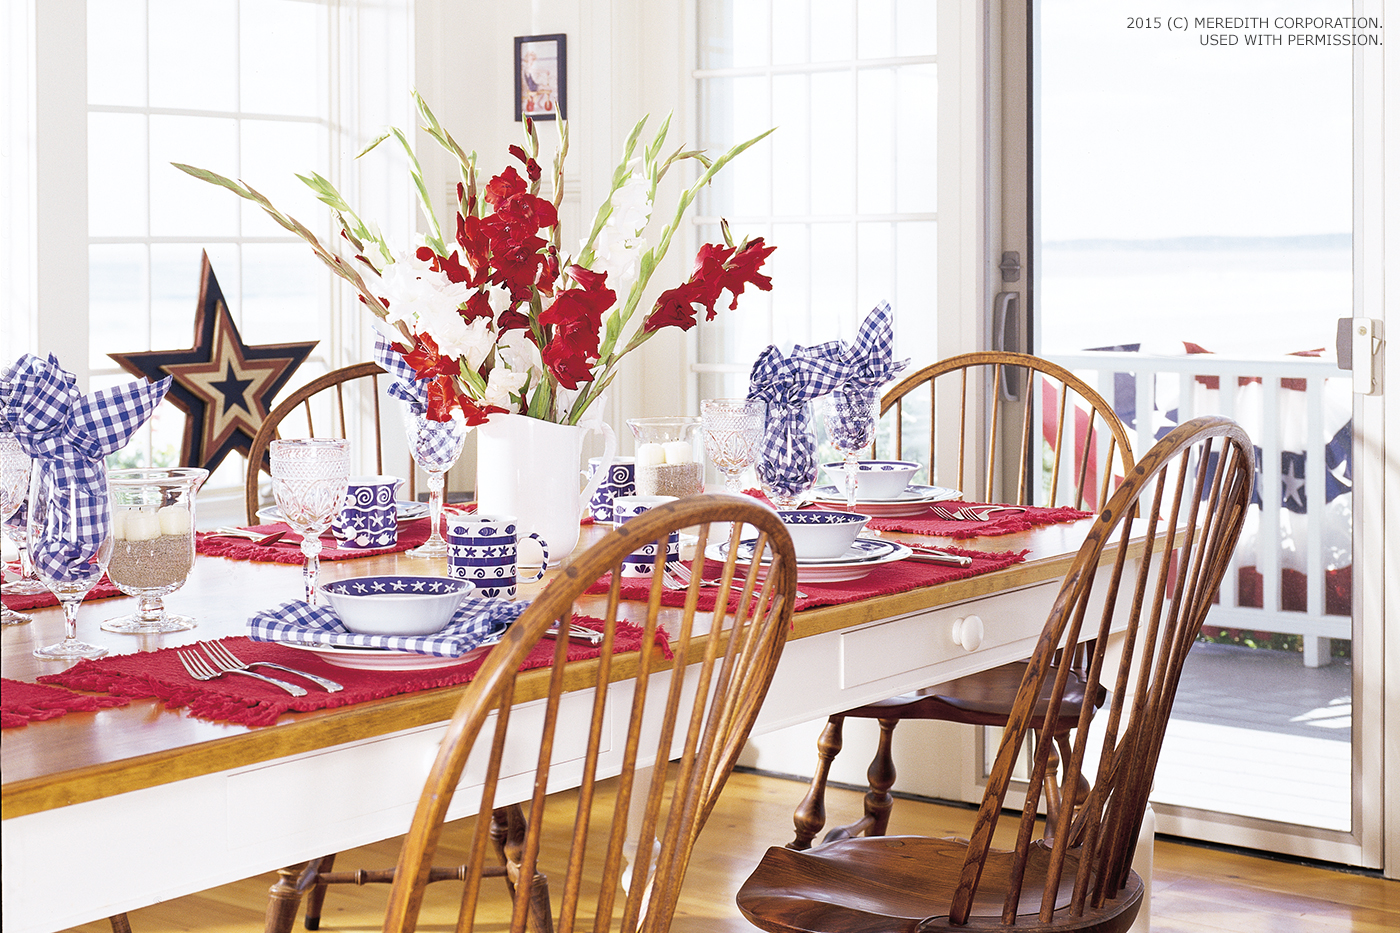 Decorating Your Home with Red, White, and Blue - bhgrelife.com